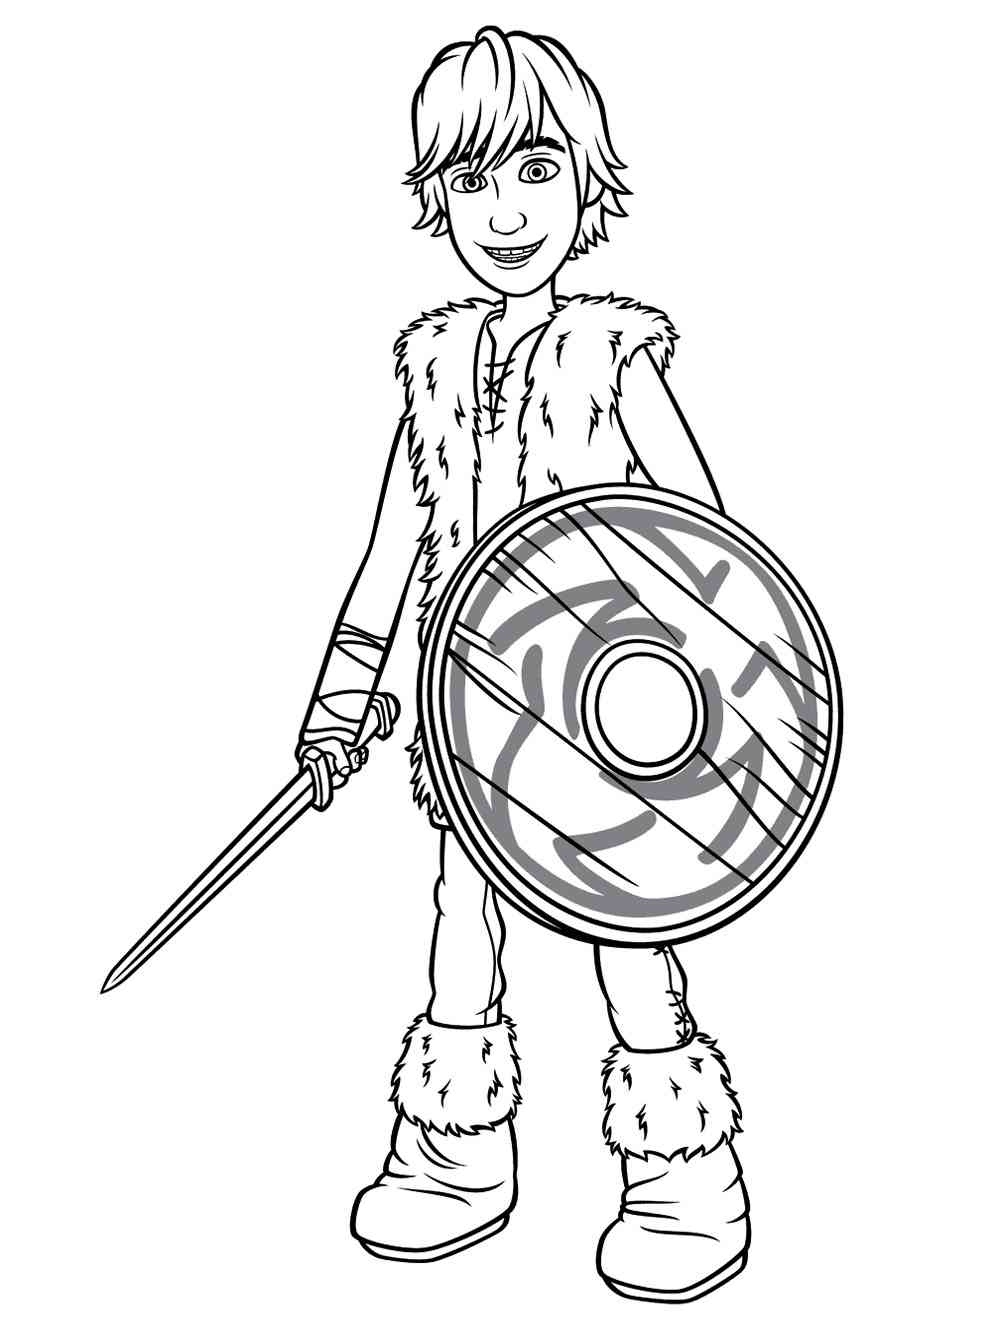 Hiccup 3 coloring page